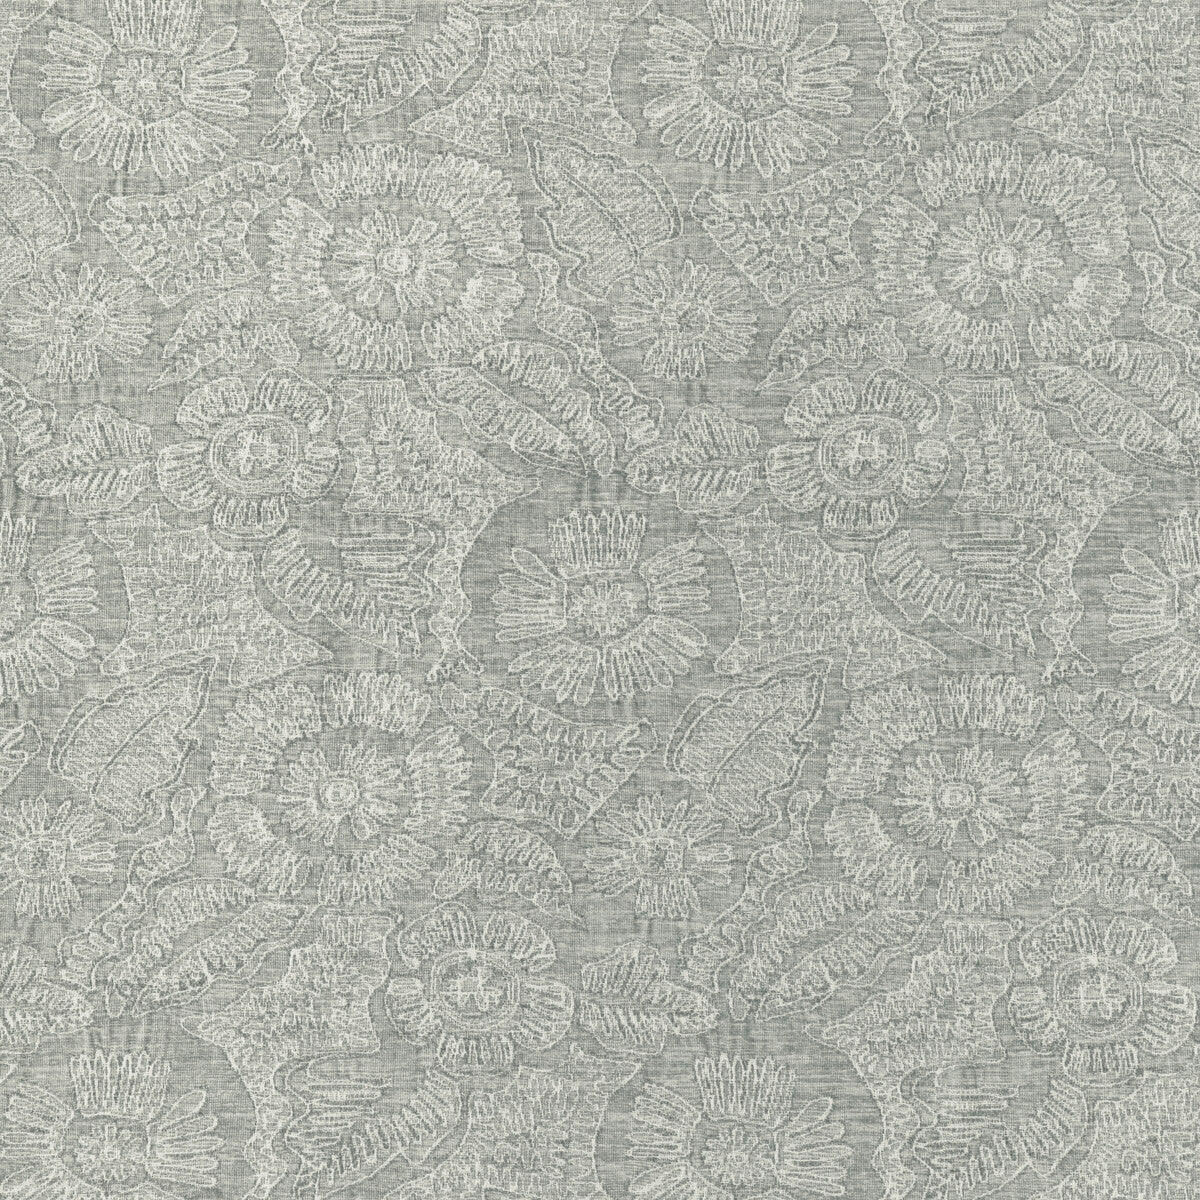 Chenille Bloom fabric in mist color - pattern 36889.15.0 - by Kravet Couture in the Atelier Weaves collection